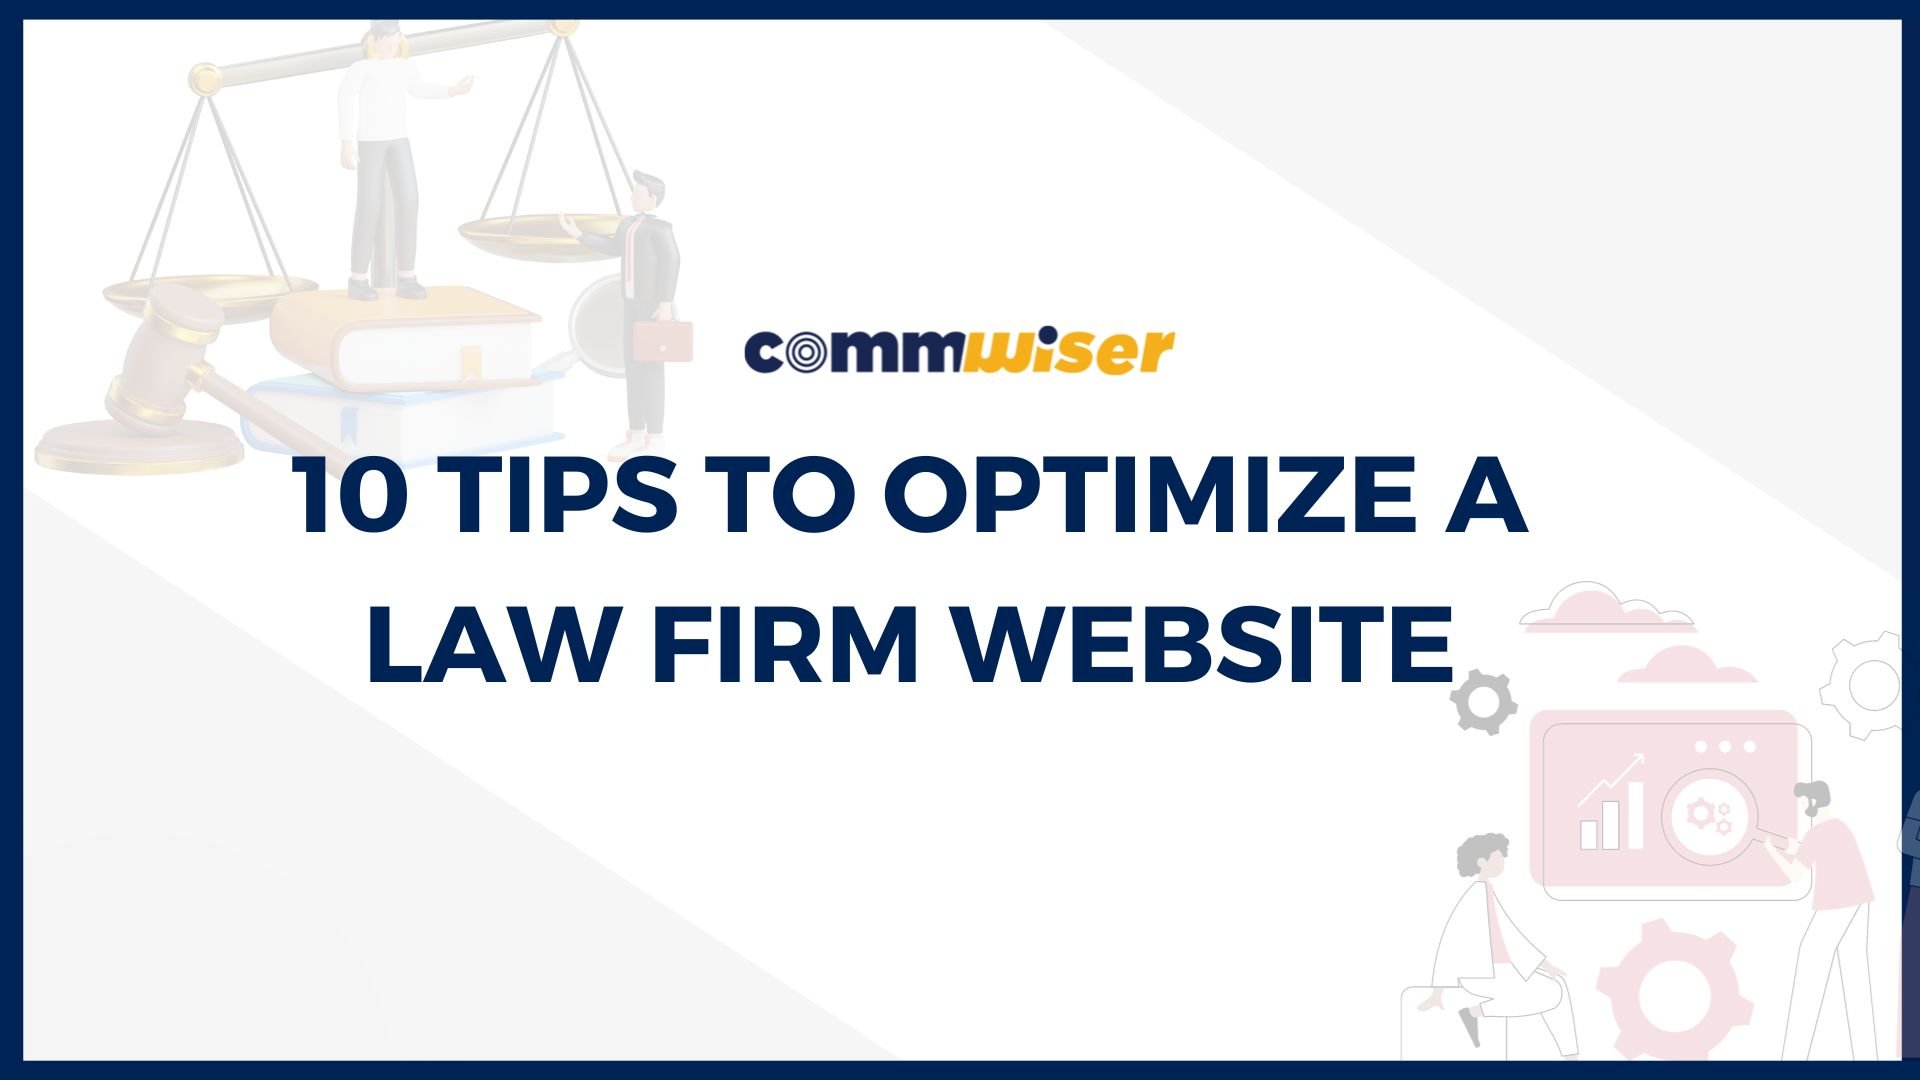 10 TIPS TO OPTIMIZE A LAW FIRM WEBSITE